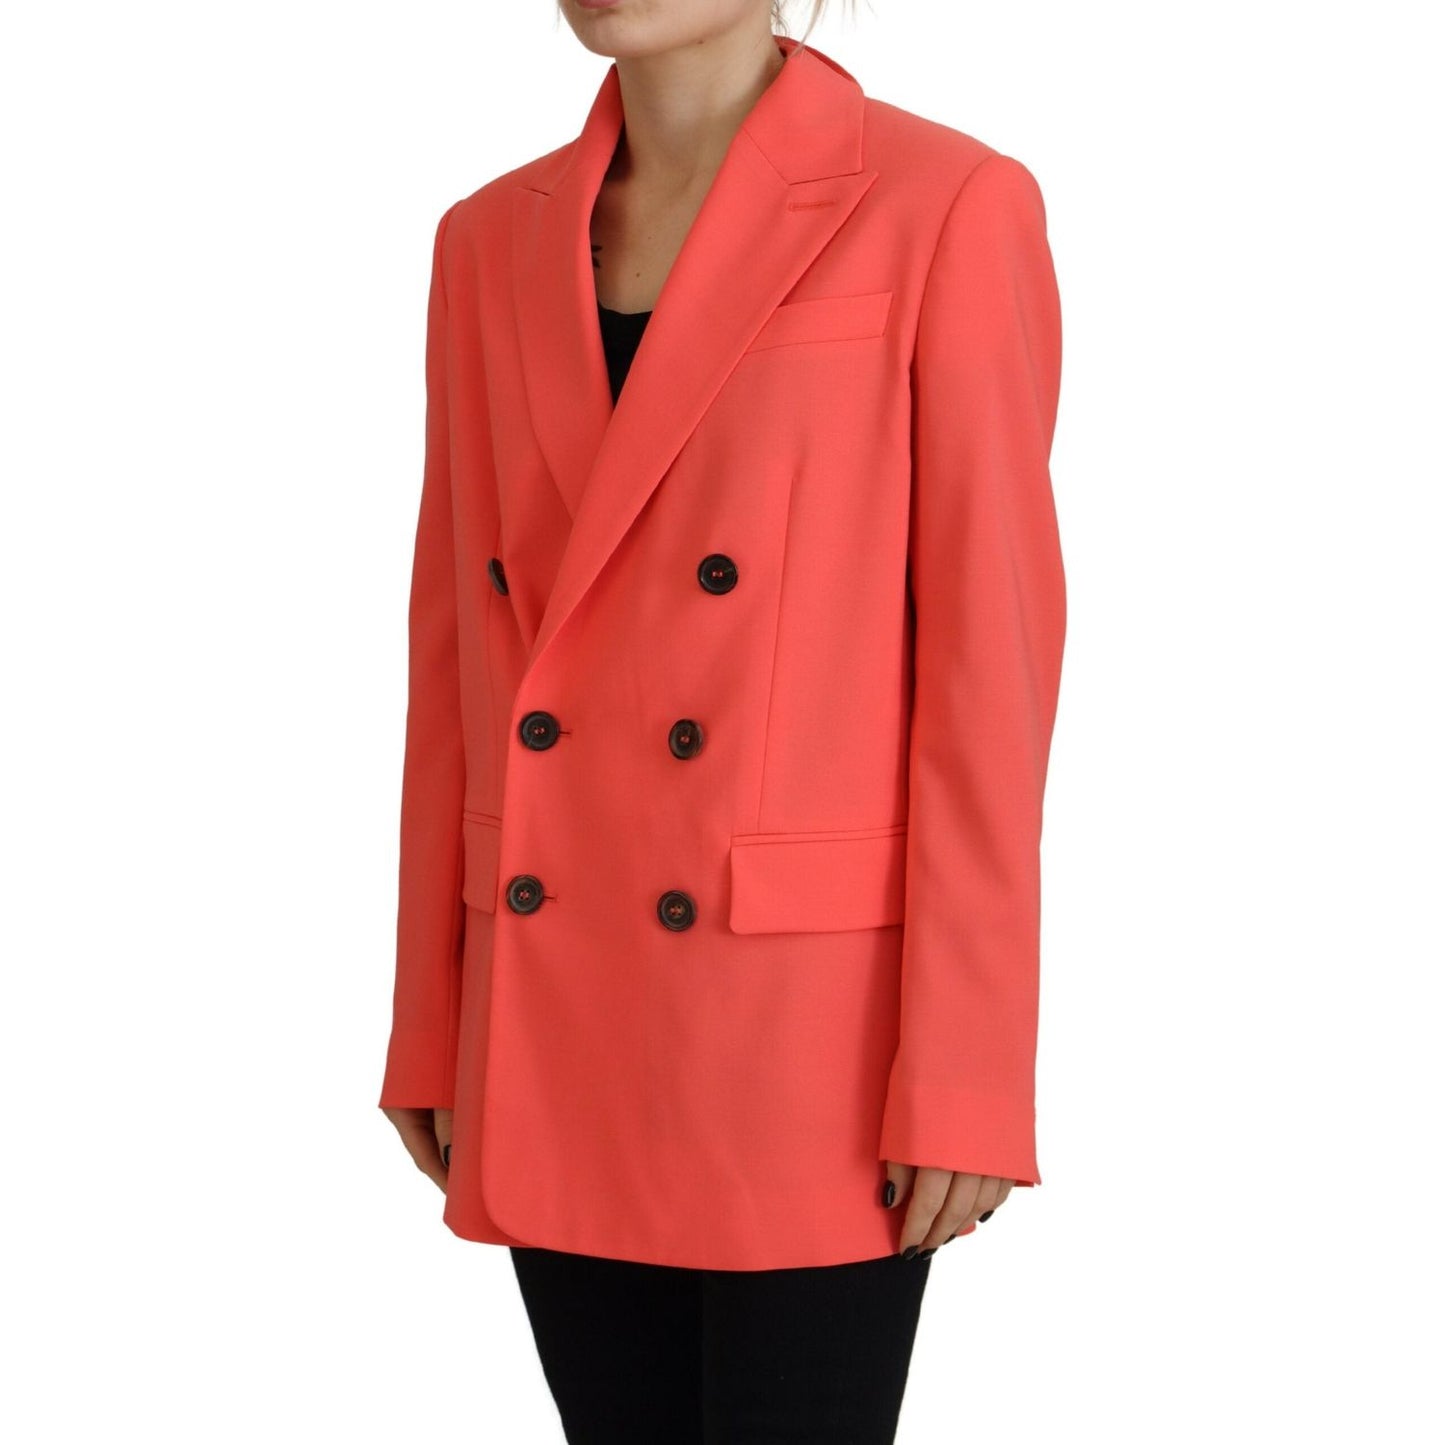 Dsquared² Pink Double Breasted Coat Blazer Jacket pink-double-breasted-coat-blazer-jacket